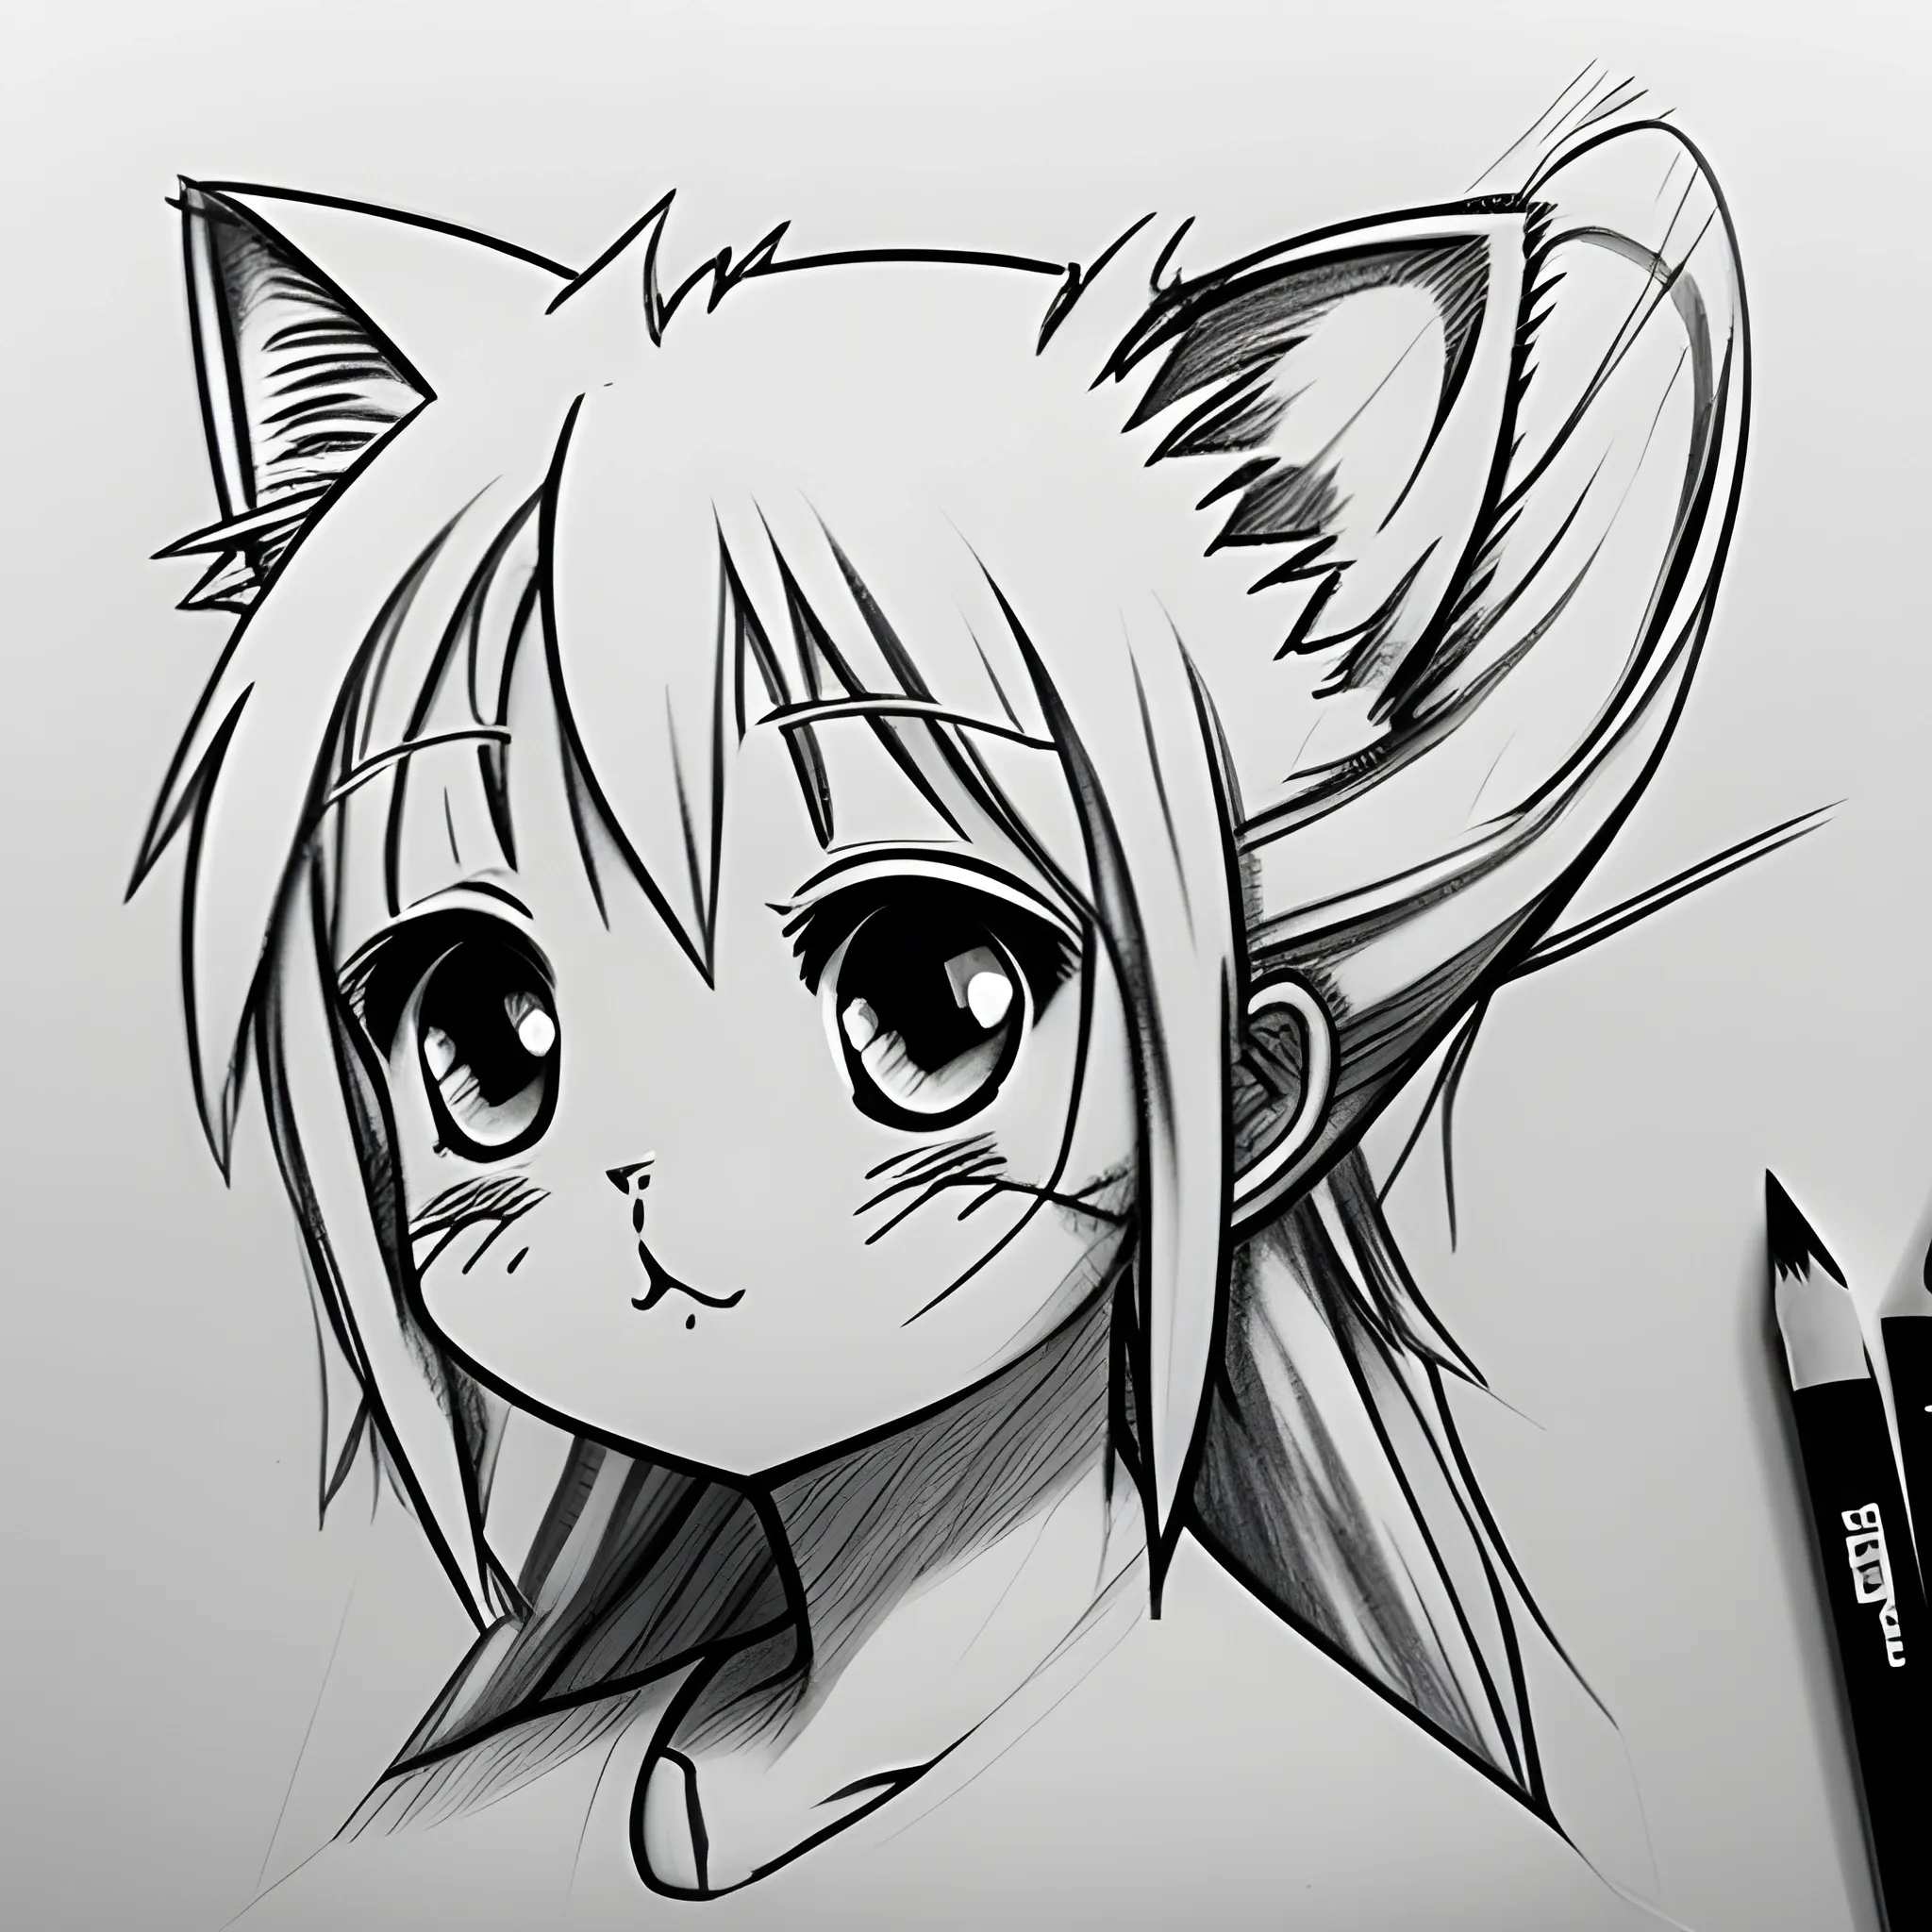 Pencil Sketch, white kitten with puffy cheeks and hair sticking straight up, manga art, anime style